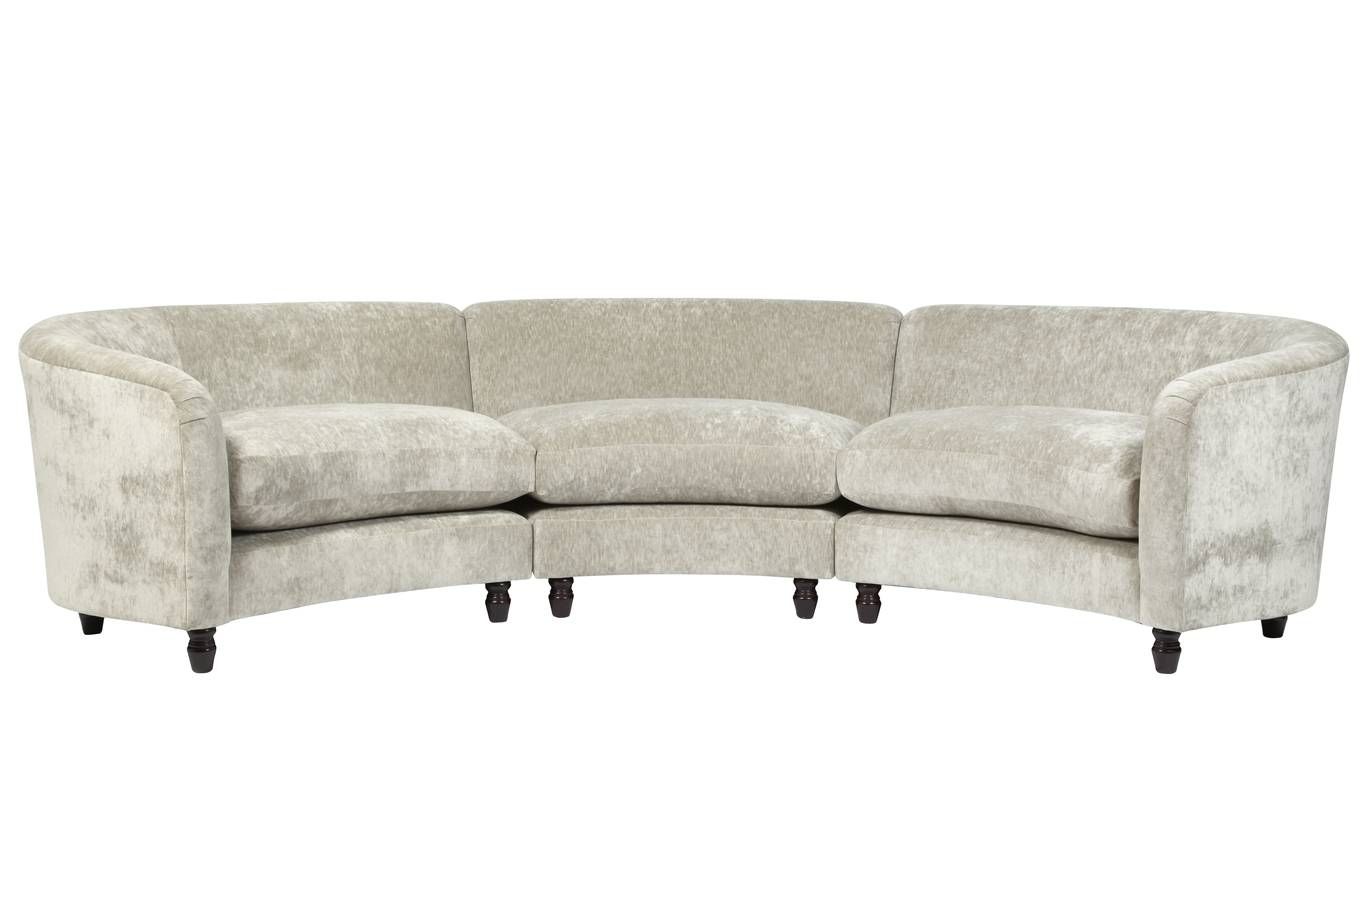 Furniture: Curved Sectional Sofa | Curved Couches Store | Curved Pertaining To Small Curved Sectional Sofas (View 14 of 15)